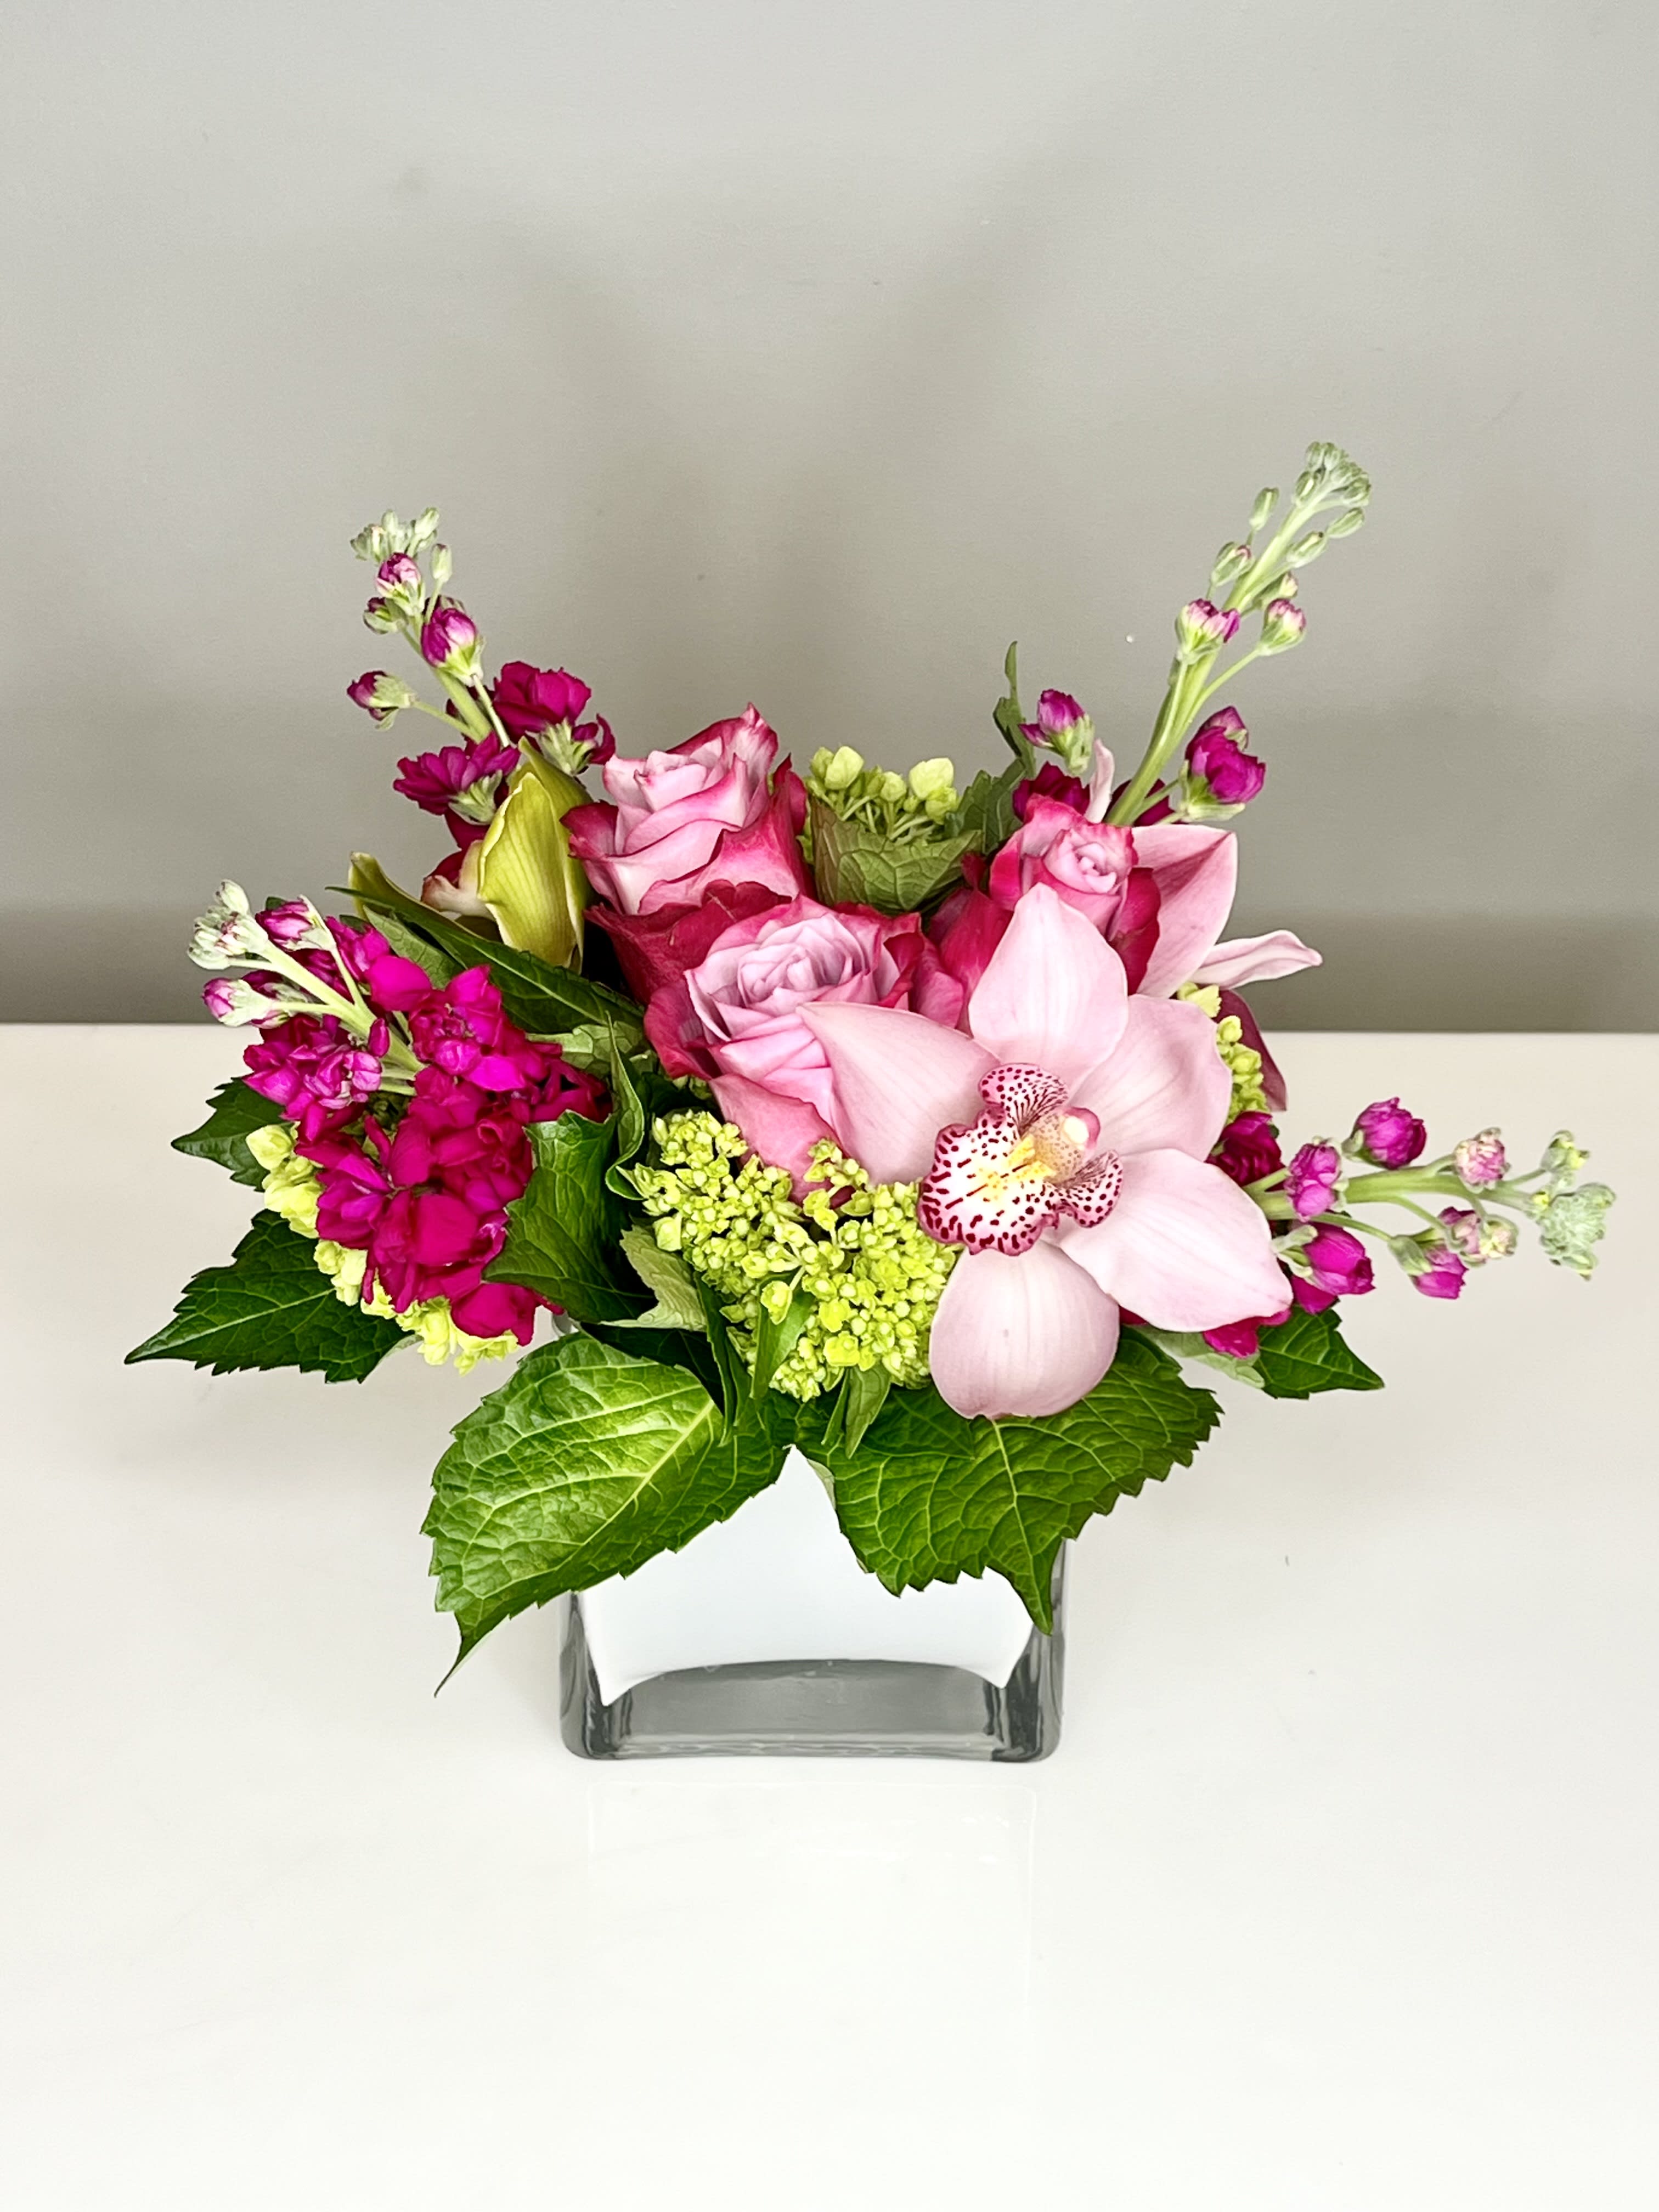 Gigi - Happy and bright arrangement of colorful blooms in a modern glass cube